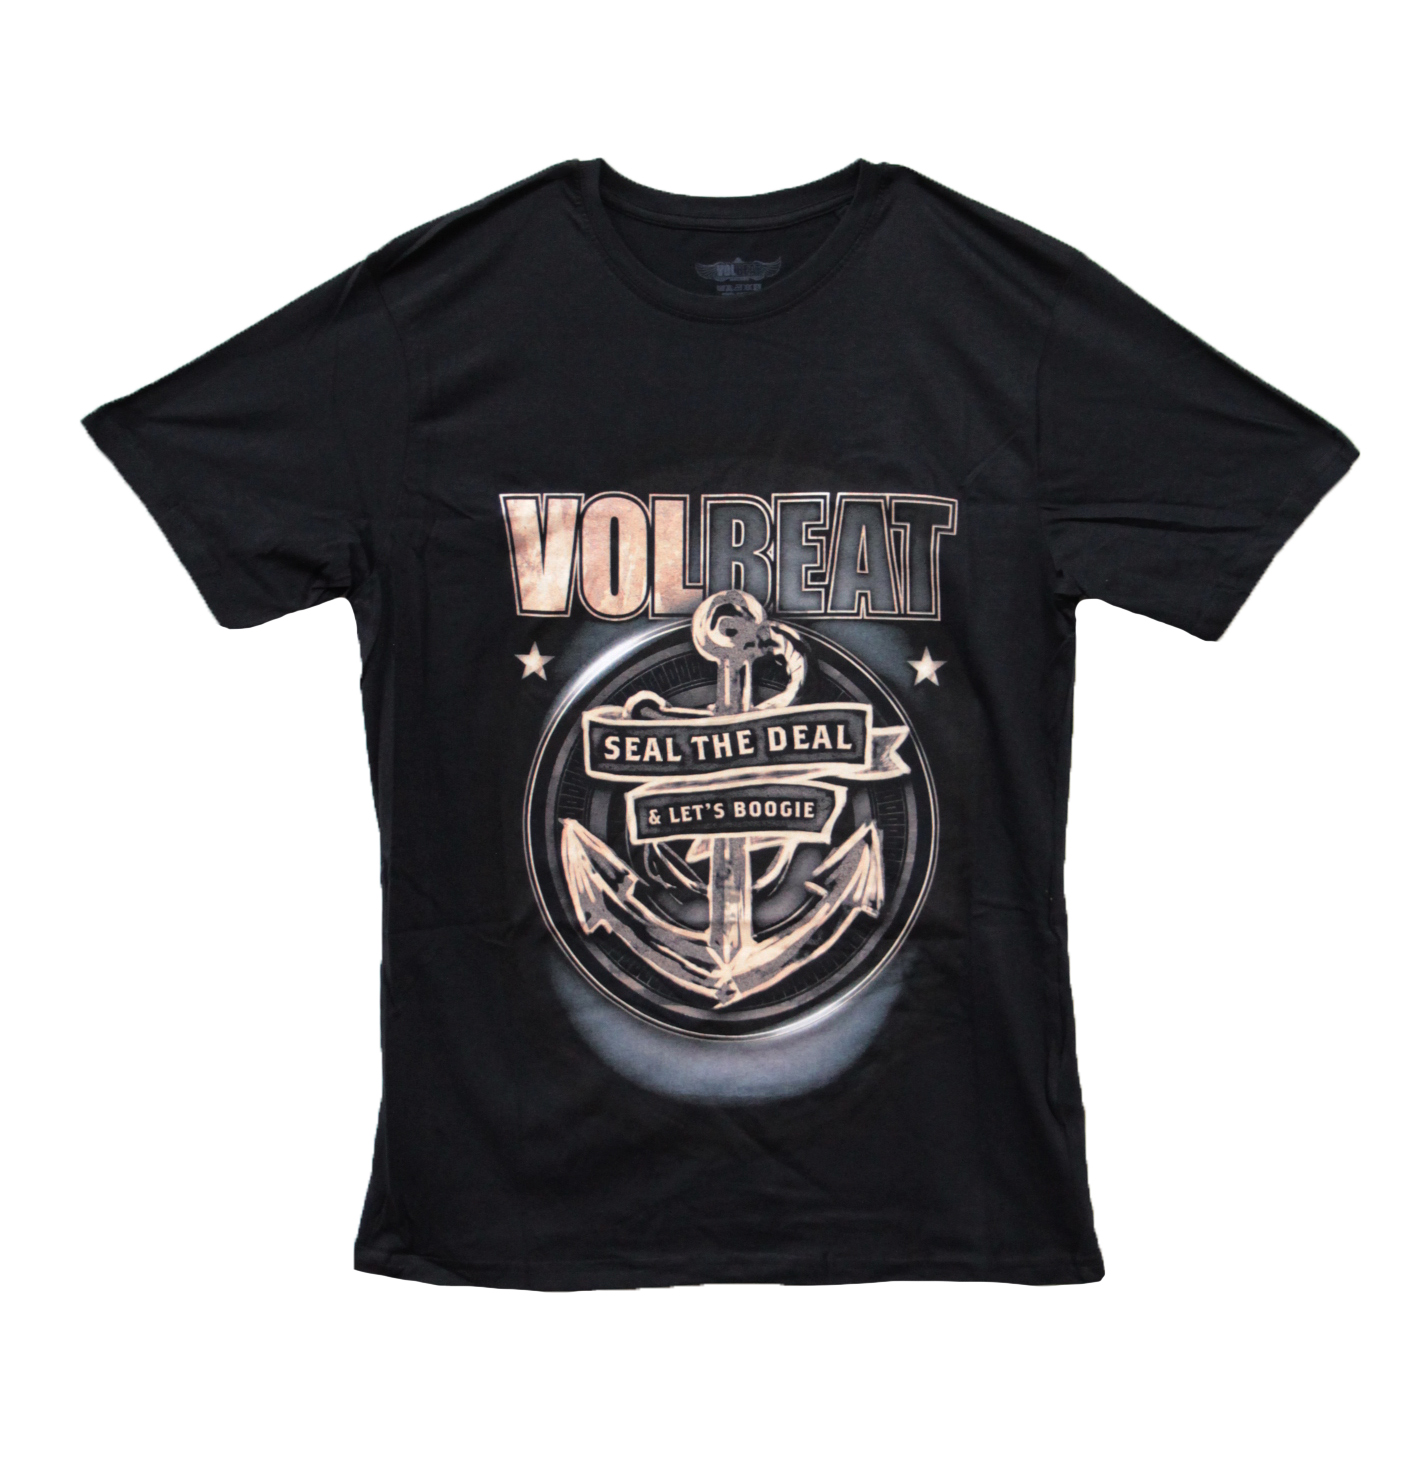 Volbeat - Seal the Deal And Let's Boogie Anchor - Vancouver Rock Shop